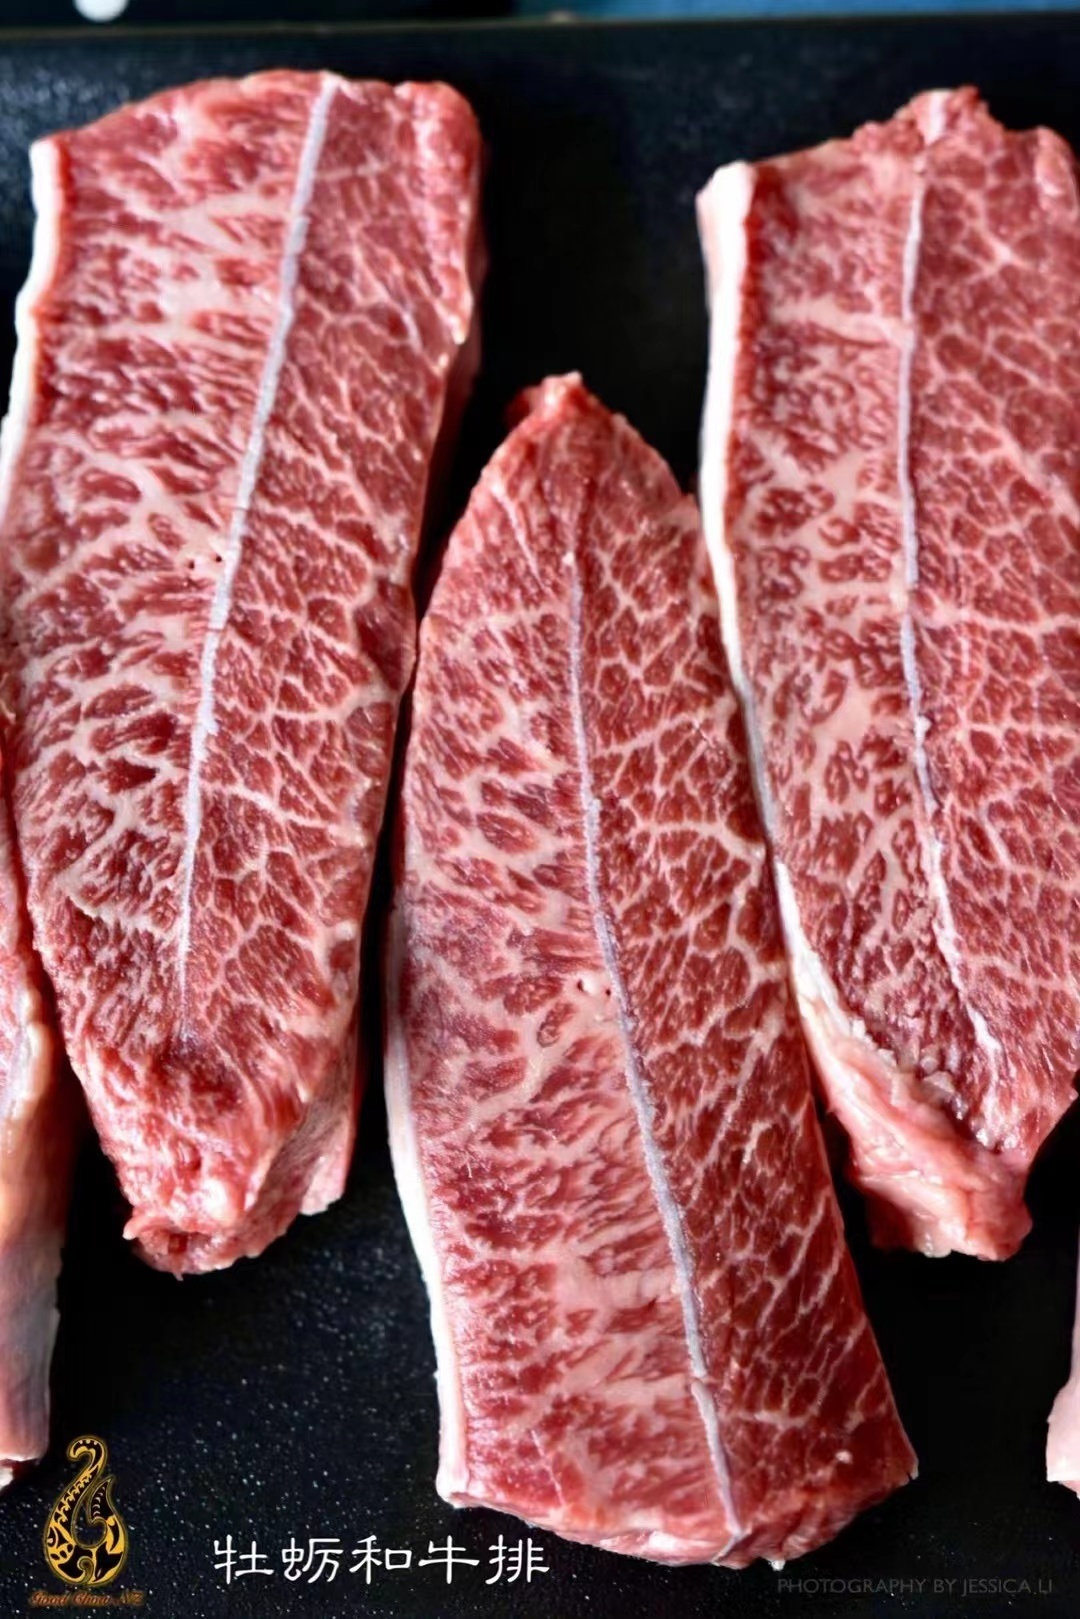 Selected Premium Grass Fed Wagyu Oyster Steak 10g